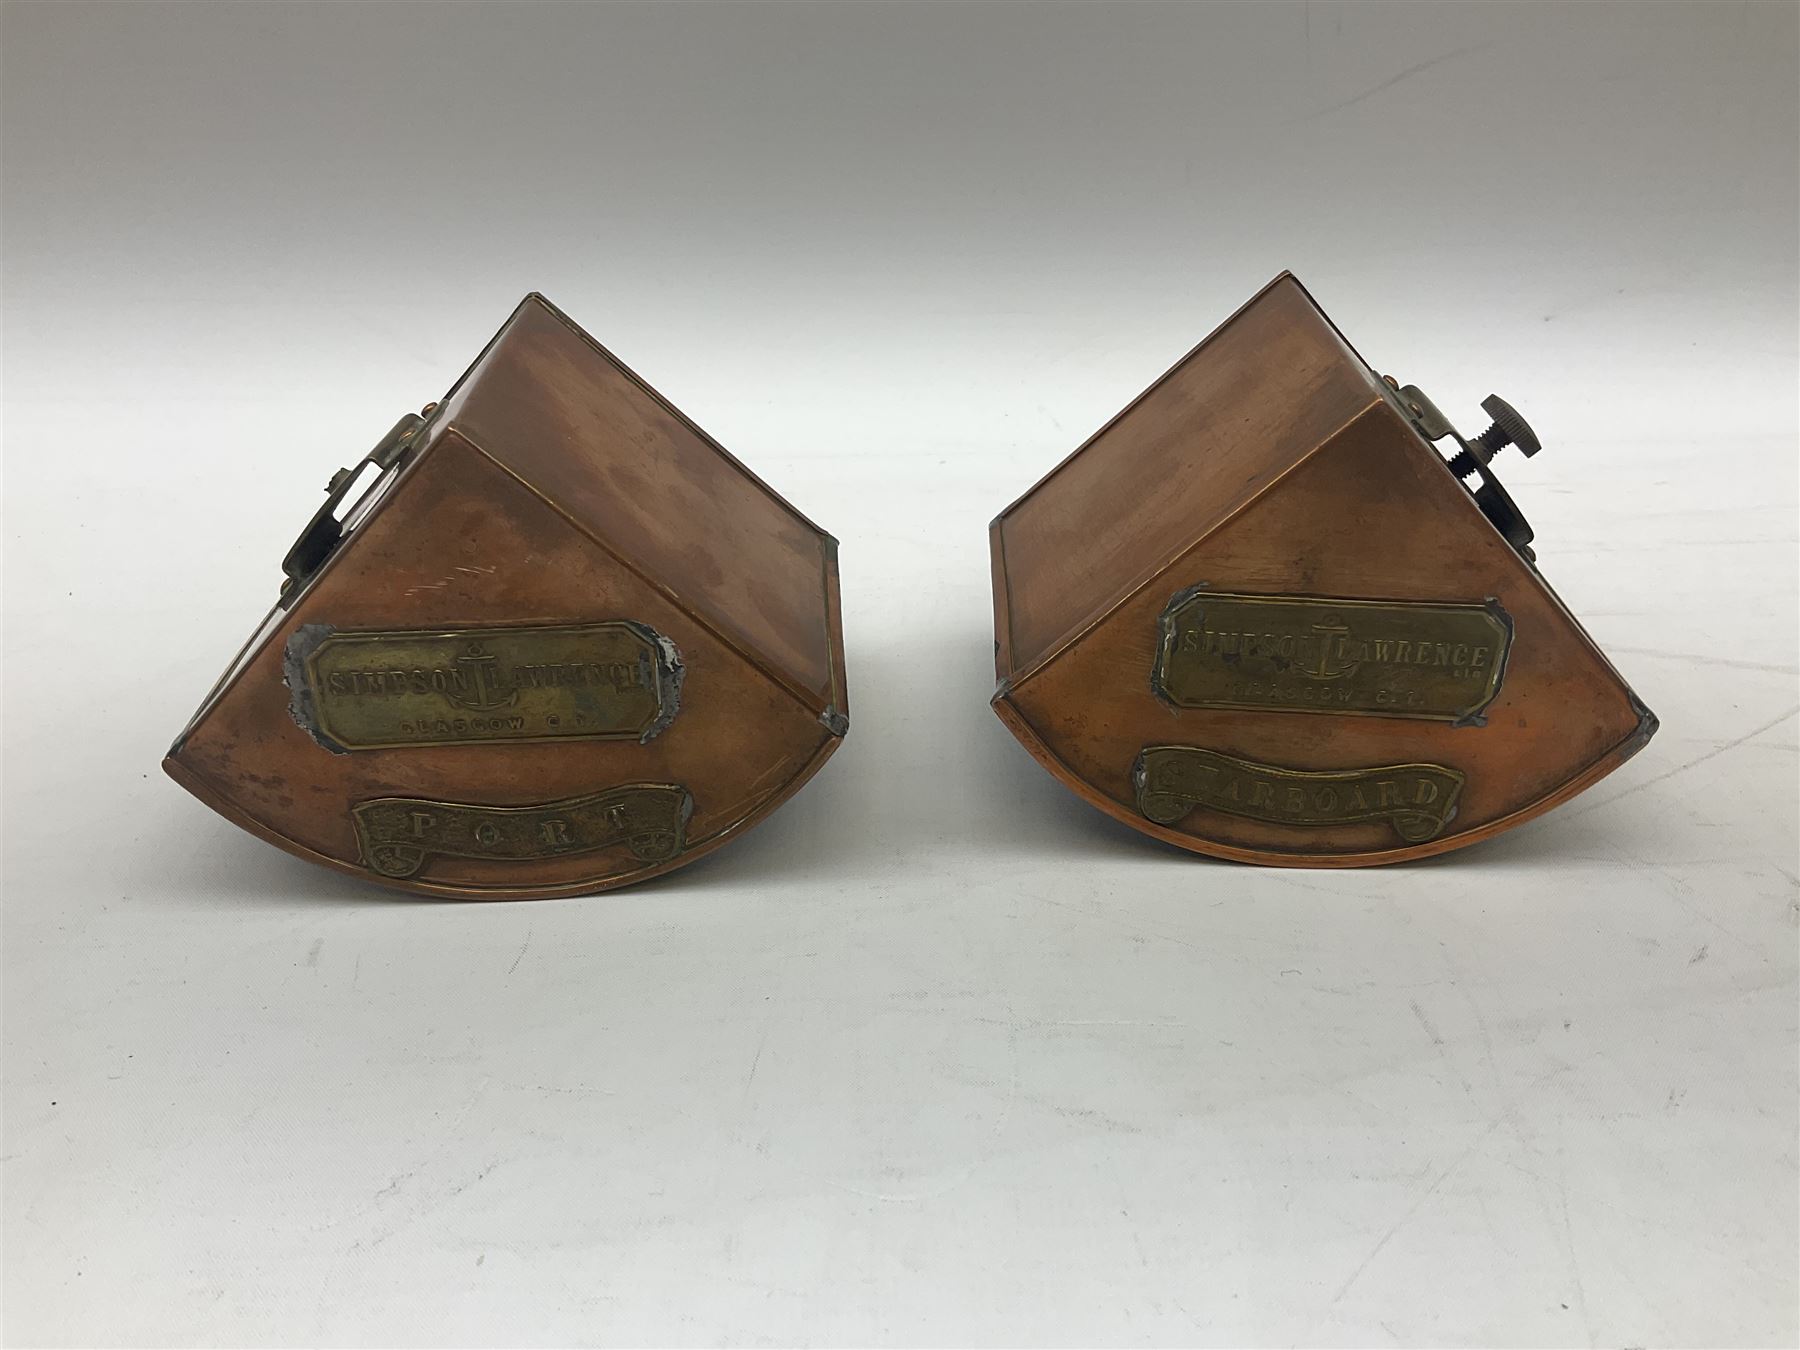 Pair of 'Starboard' and 'Port' copper ship lamps of bow-fronted triangular form by Simpson Lawrence - Image 4 of 9